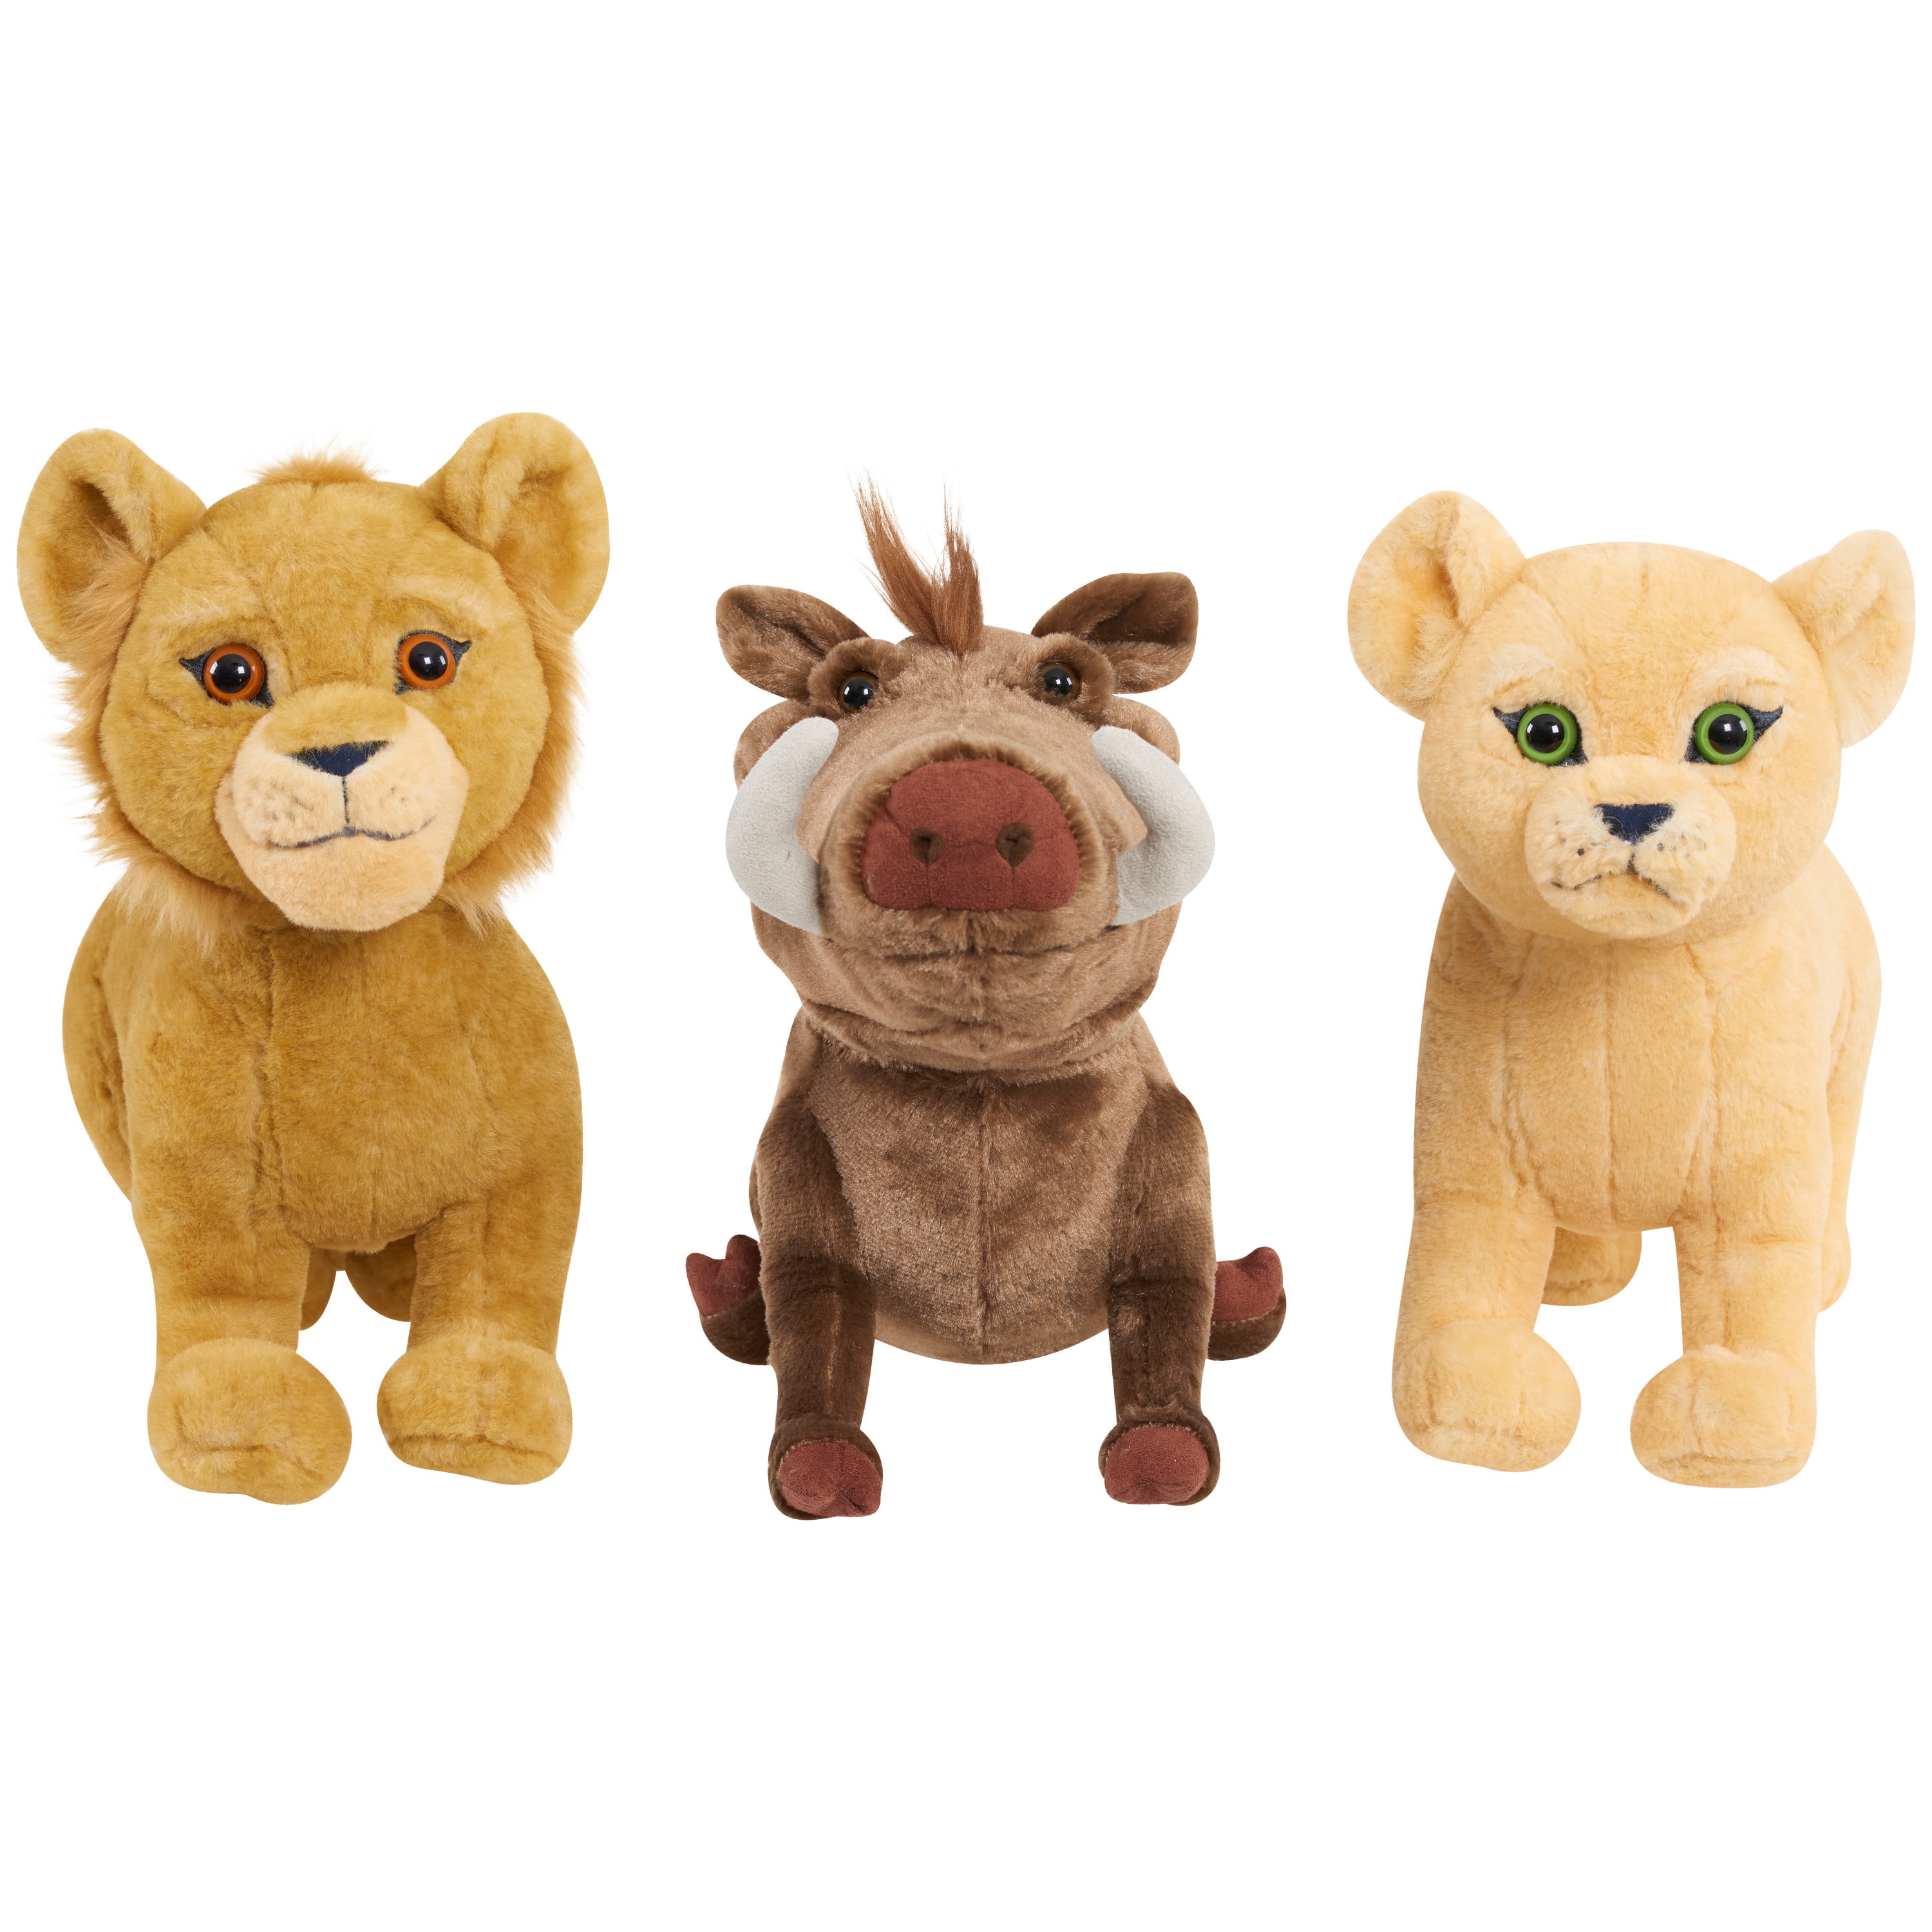 Disney's The Lion King Large Plush Simba, Stuffed Animal, Lion, Officially Licensed Kids Toys for Ages 3 Up, Gifts and Presents - image 3 of 4